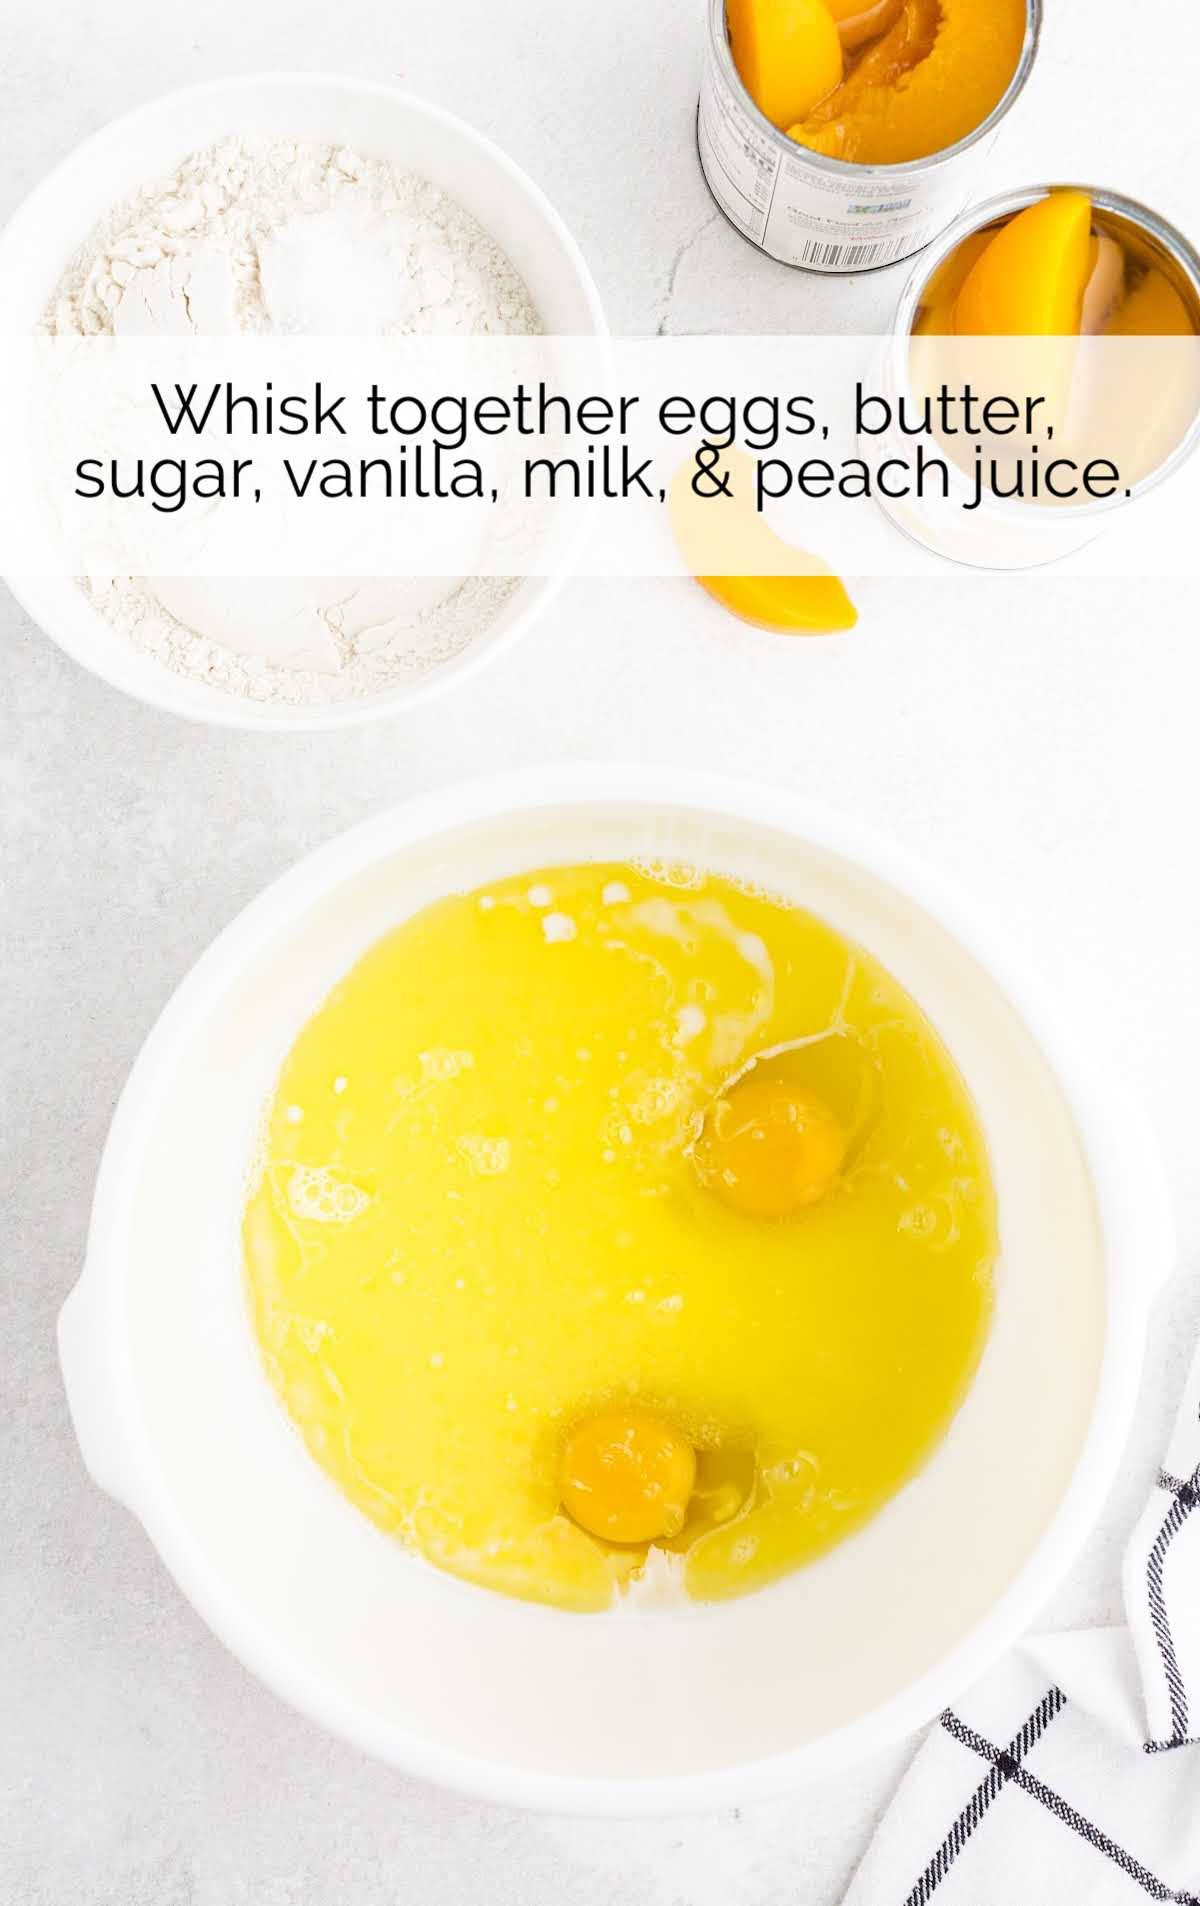 eggs, butter, sugar, vanilla, milk, and peach juice whisked together in a bowl